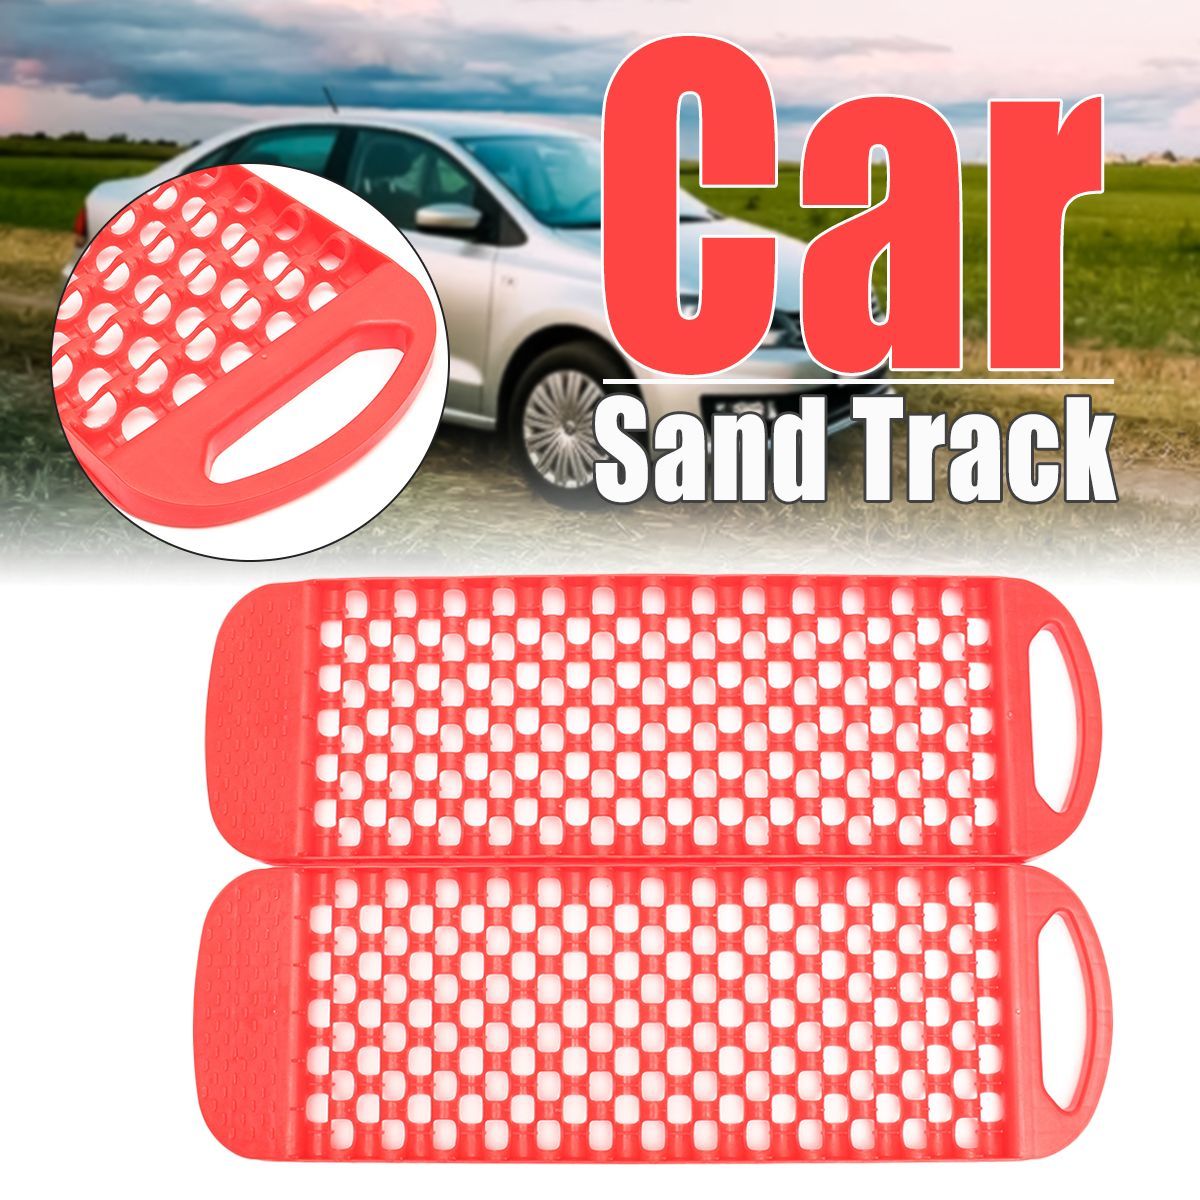 Pair-Red-Recovery-Tracks-Road-Tyre-Ladder-Anti-skid-Sand-Track-for-Mud-Sand-Snow-Grass-1251657